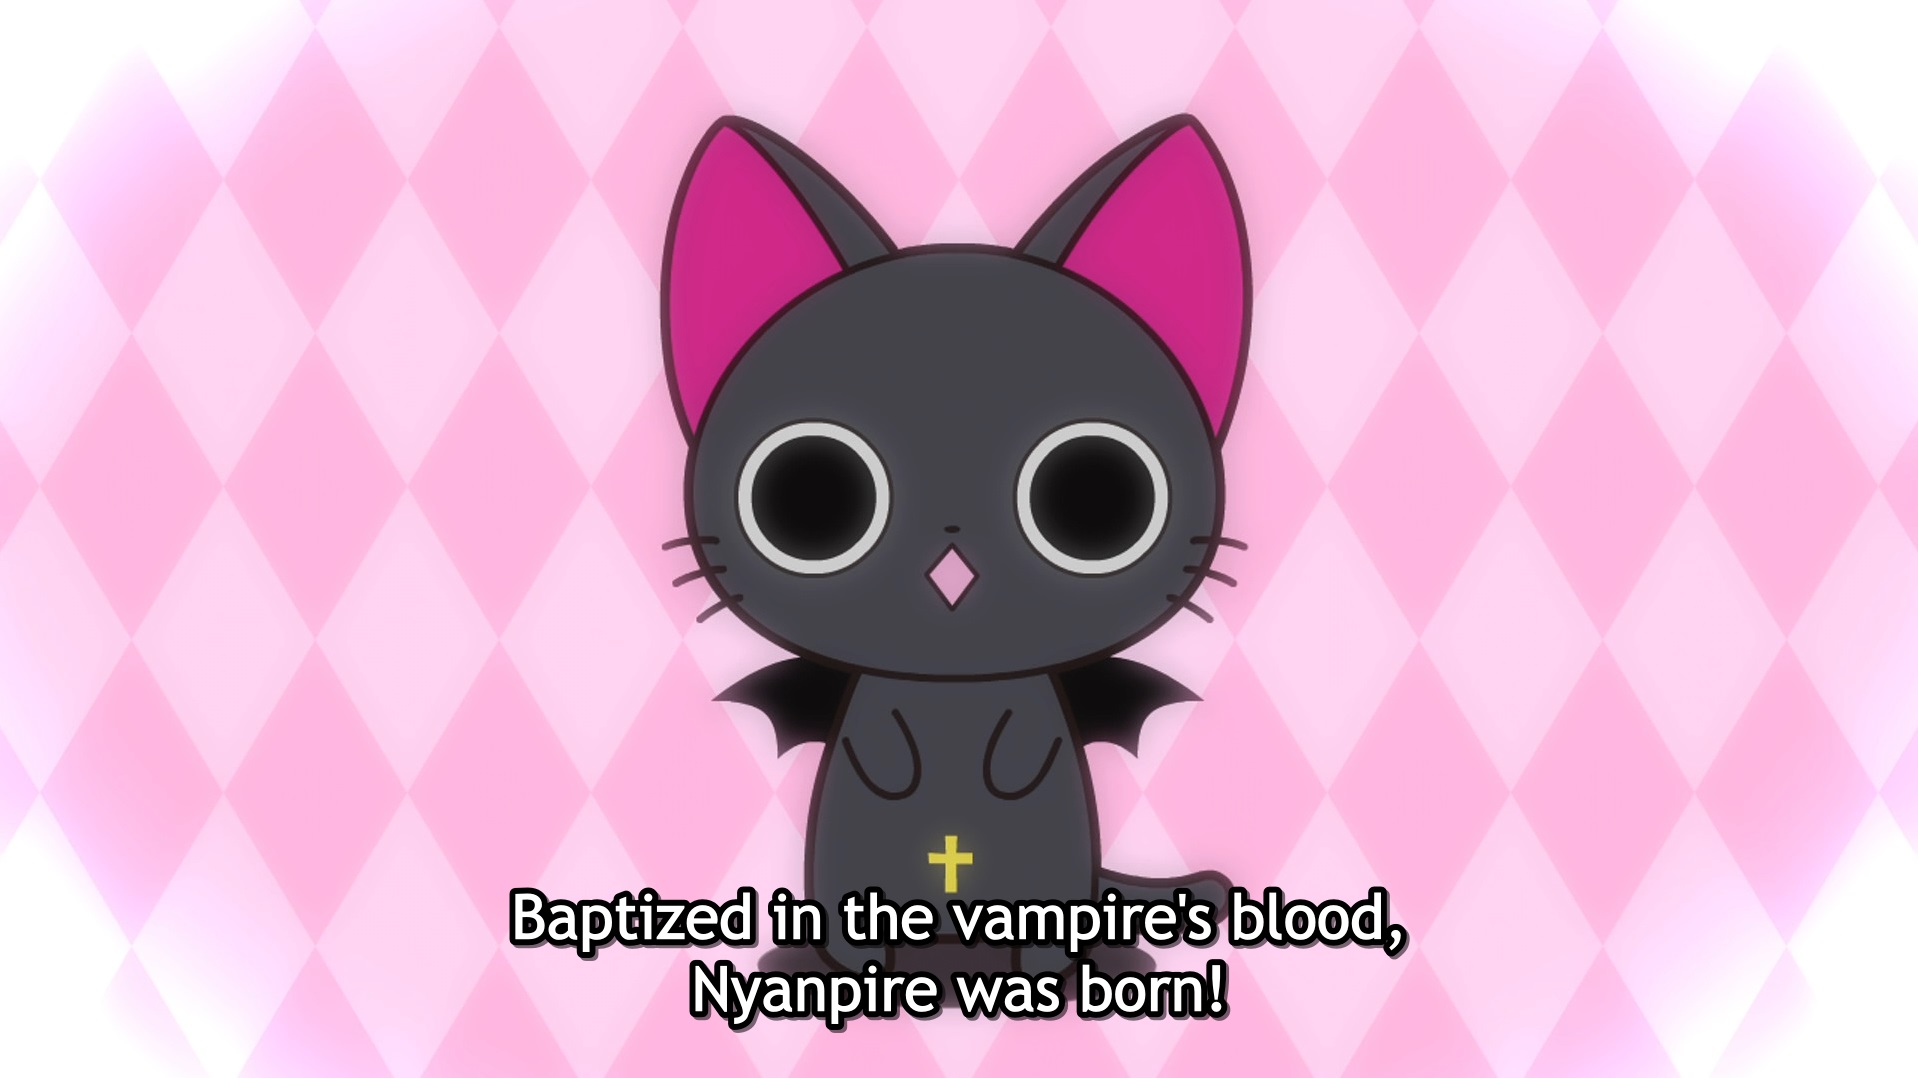 Nyanpire, a vampiric kitten, is saved from starving to death by being transformed into a creature of the night in a scene from the Nyanpire - The Vampire Cat TV anime.